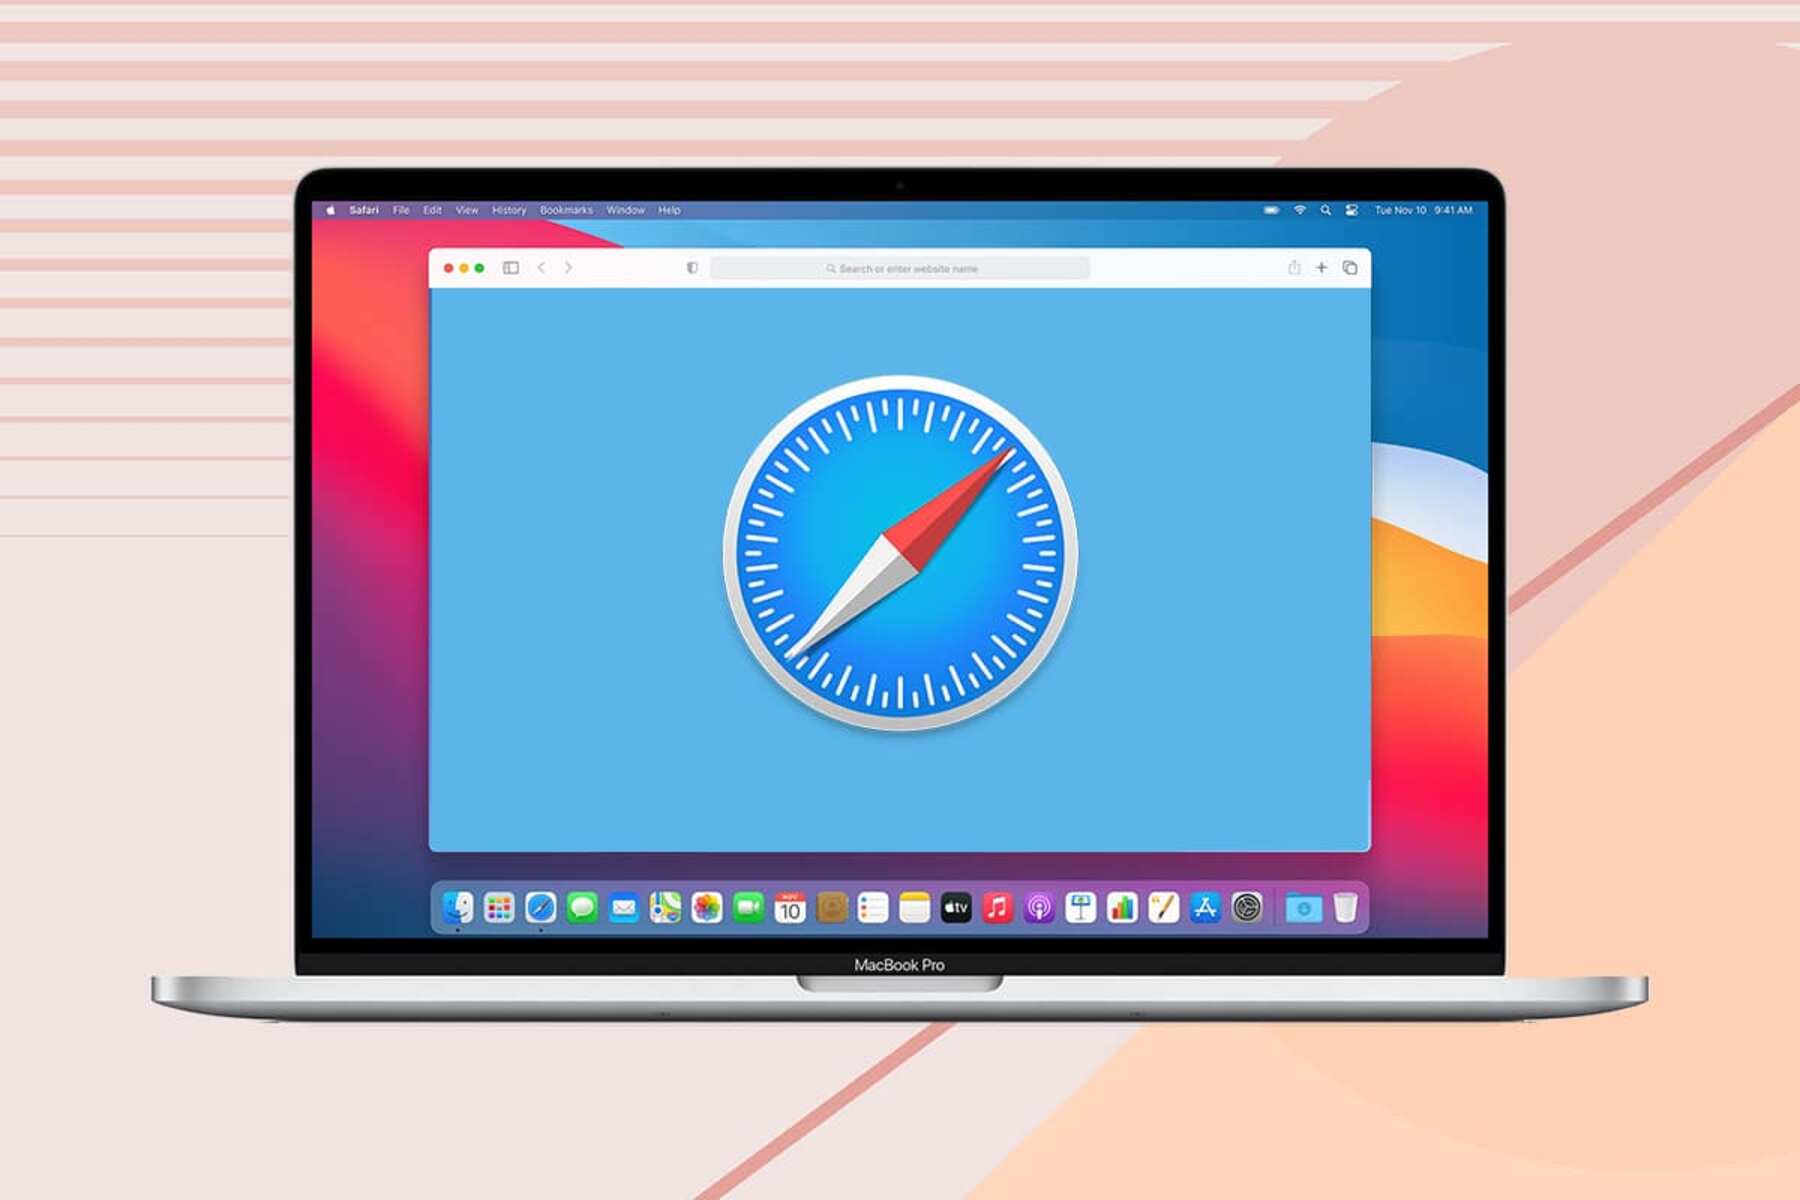 How To Allow Cross-Site Tracking In Safari On Mac